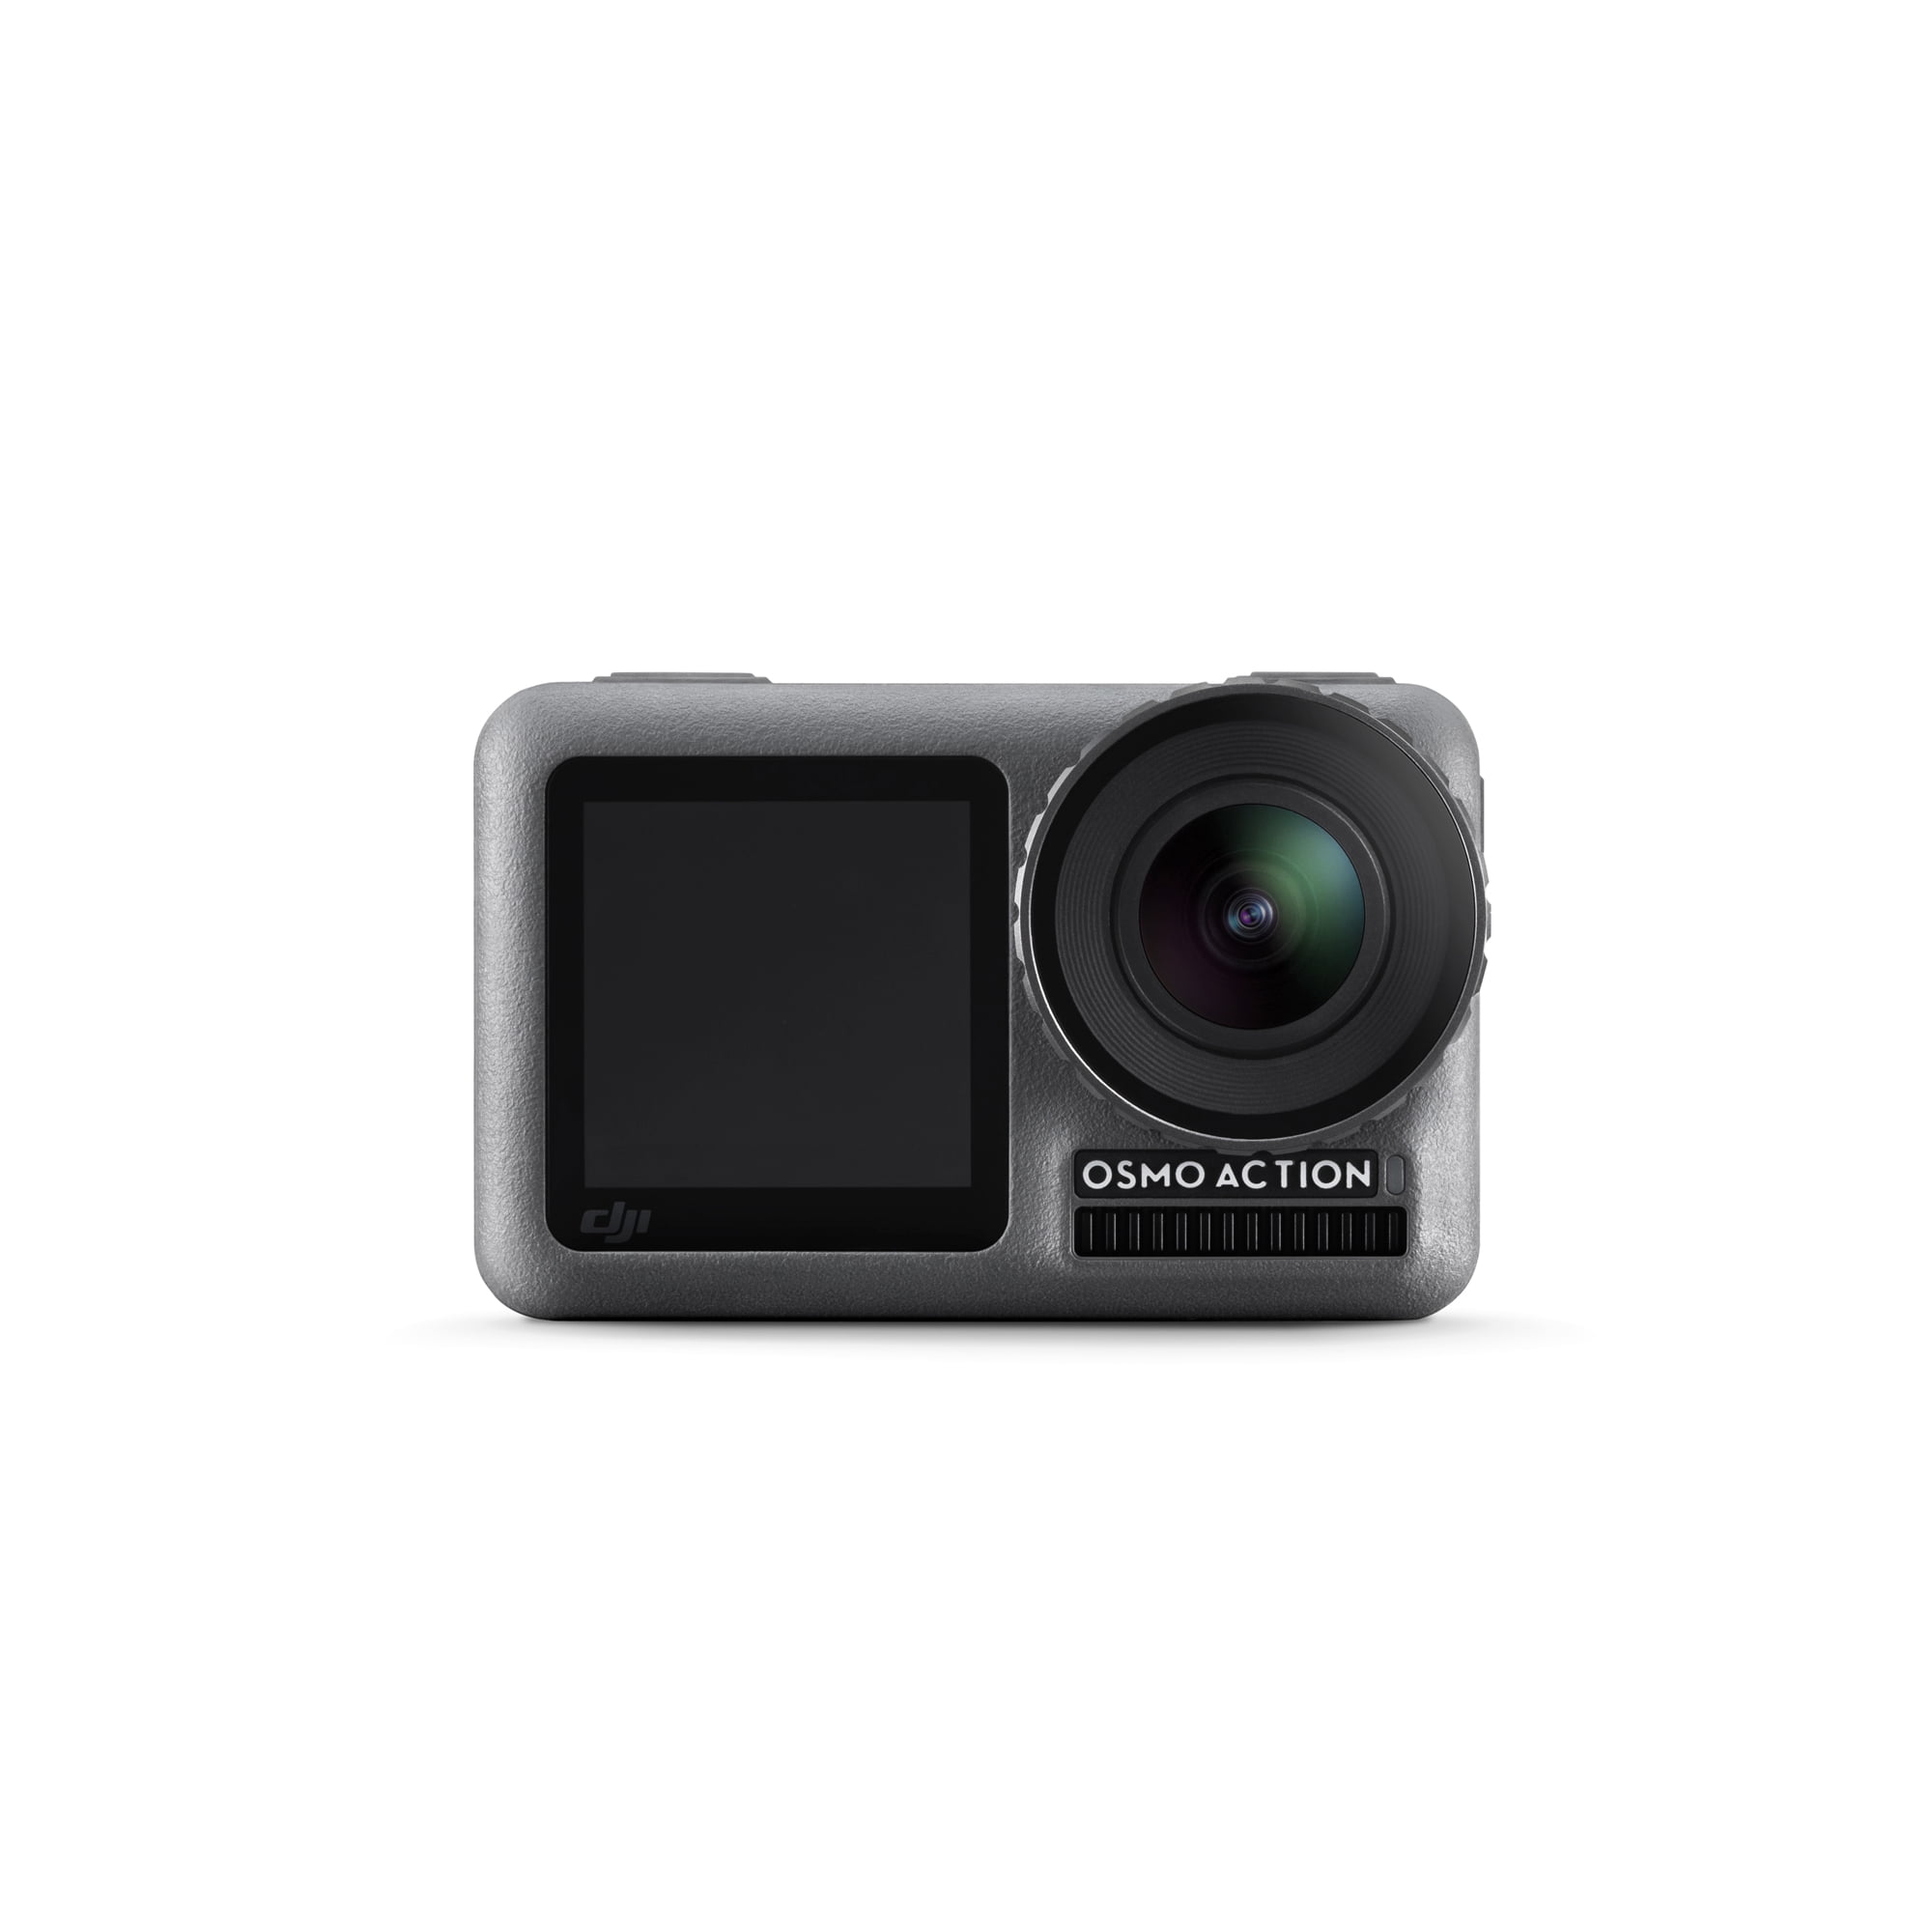 GoPro HERO7 Black - Waterproof Action Camera with Touch Screen, 4K 